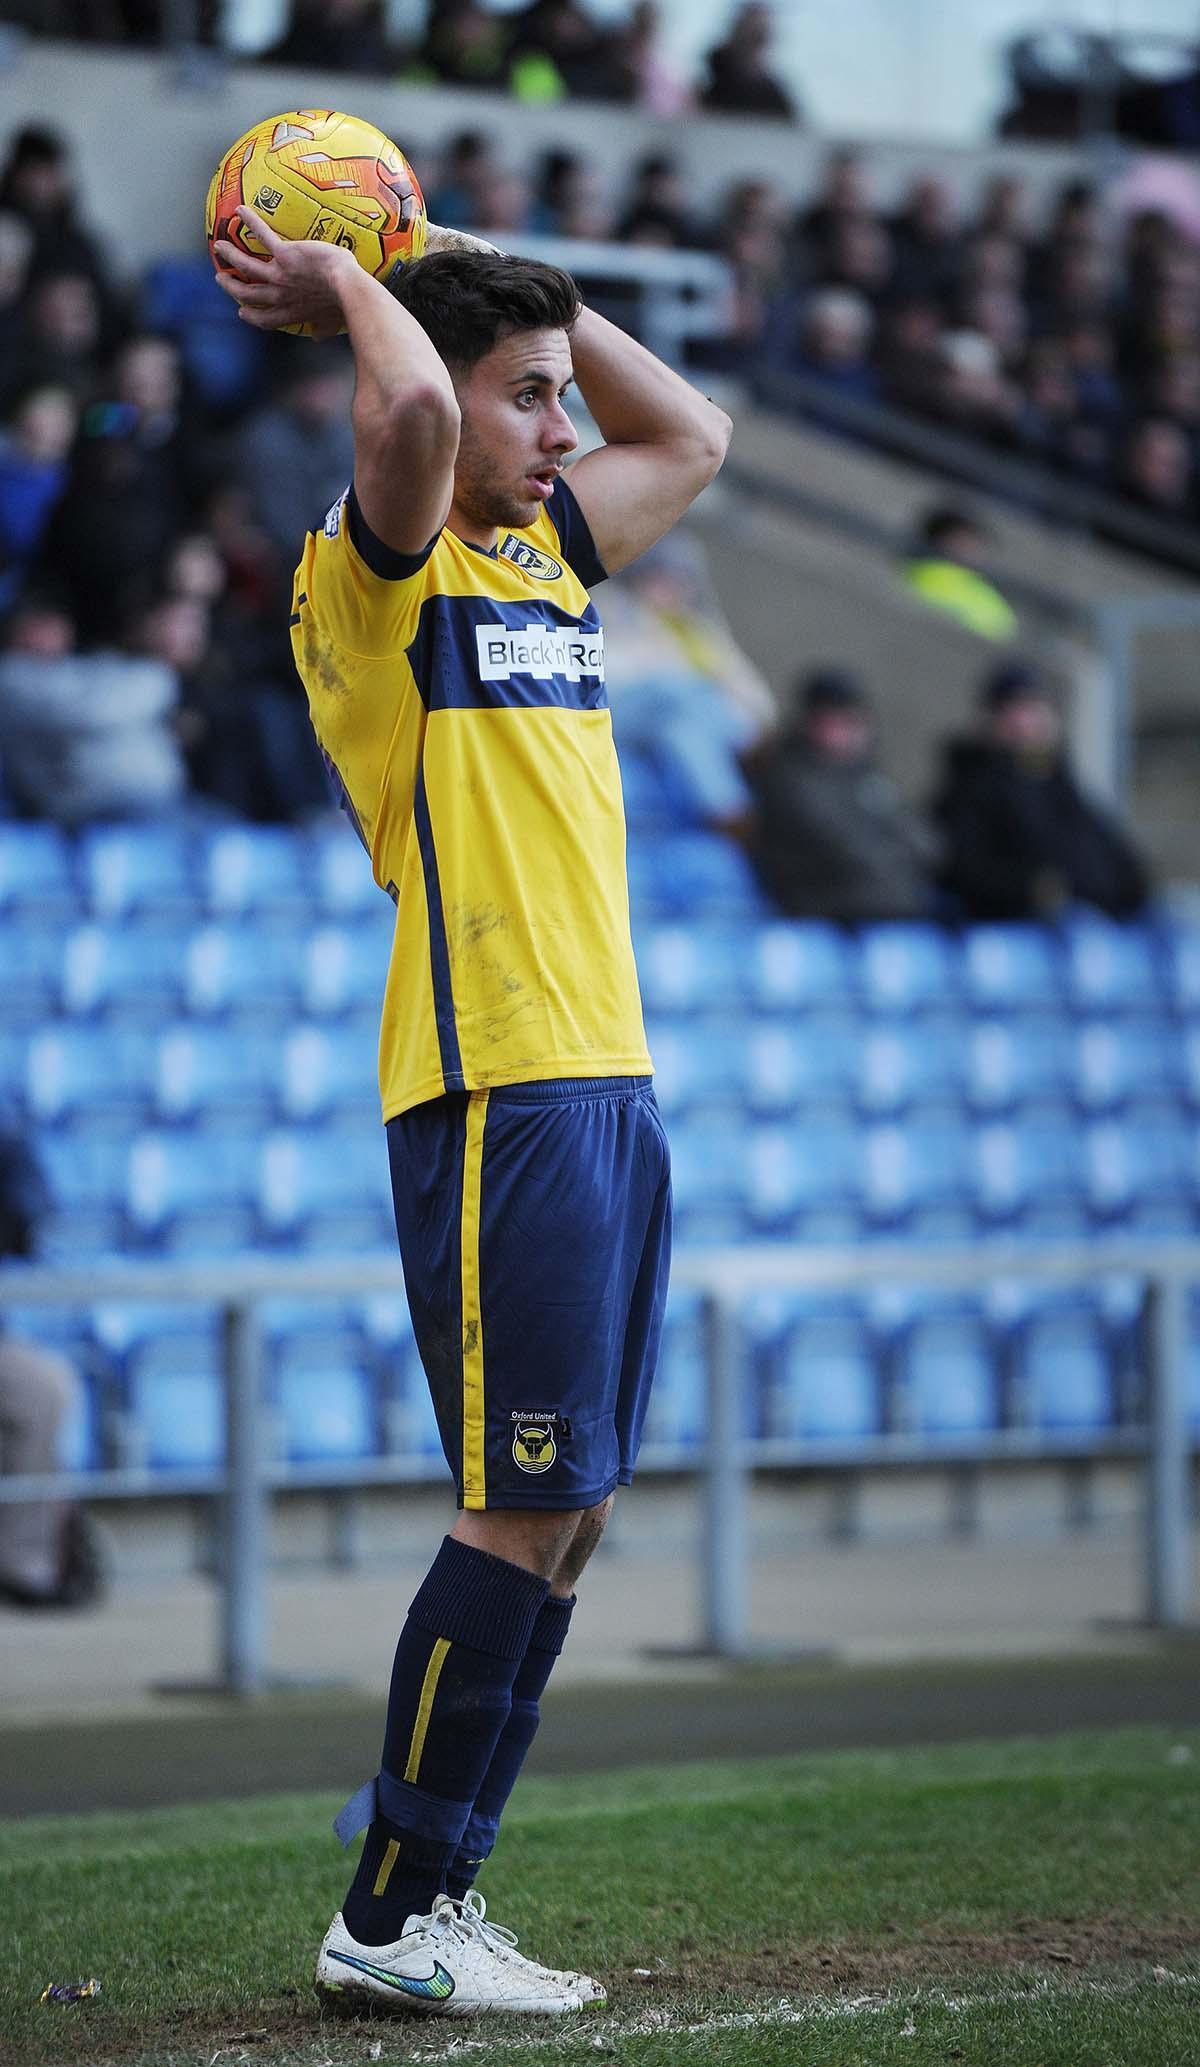 Oxford United v Mansfield Town at the Kassam Stadium. Saturday 23rd February 2015. 
IN PICTURES